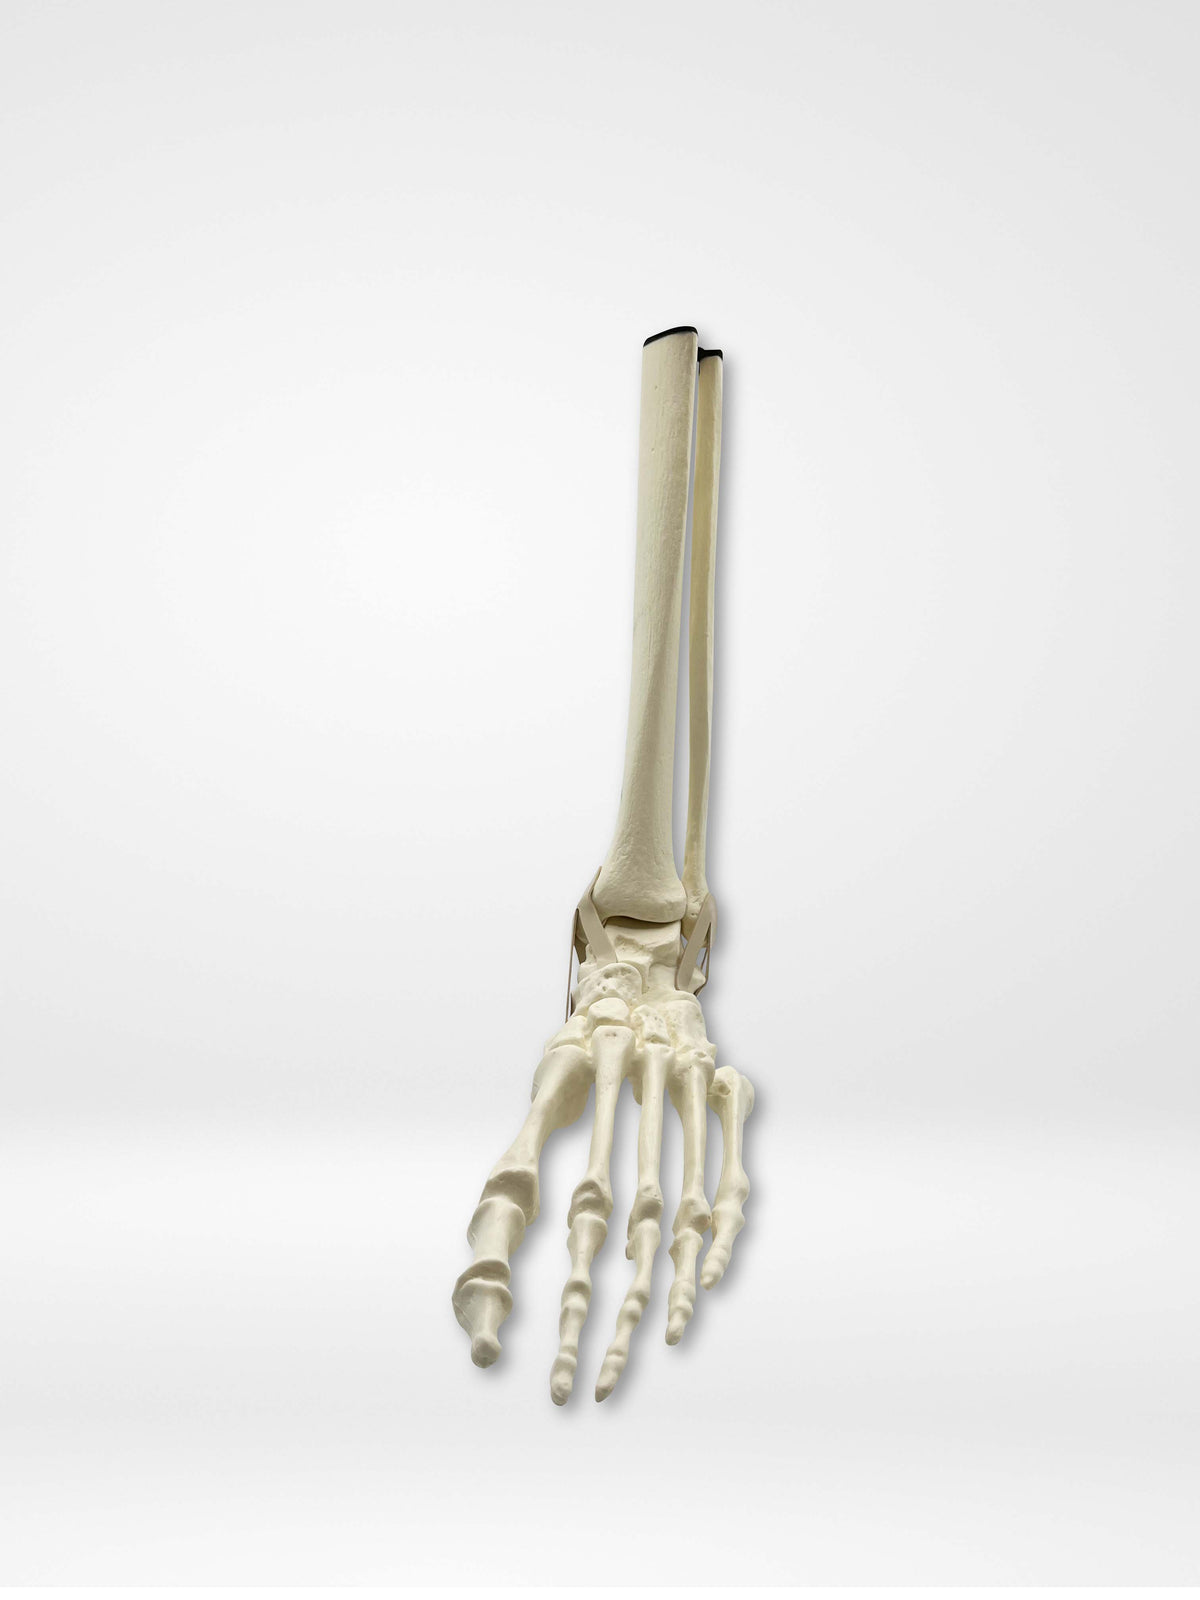 13656 - Left Articulated Ankle with Mid Shaft Tibia and Fibula